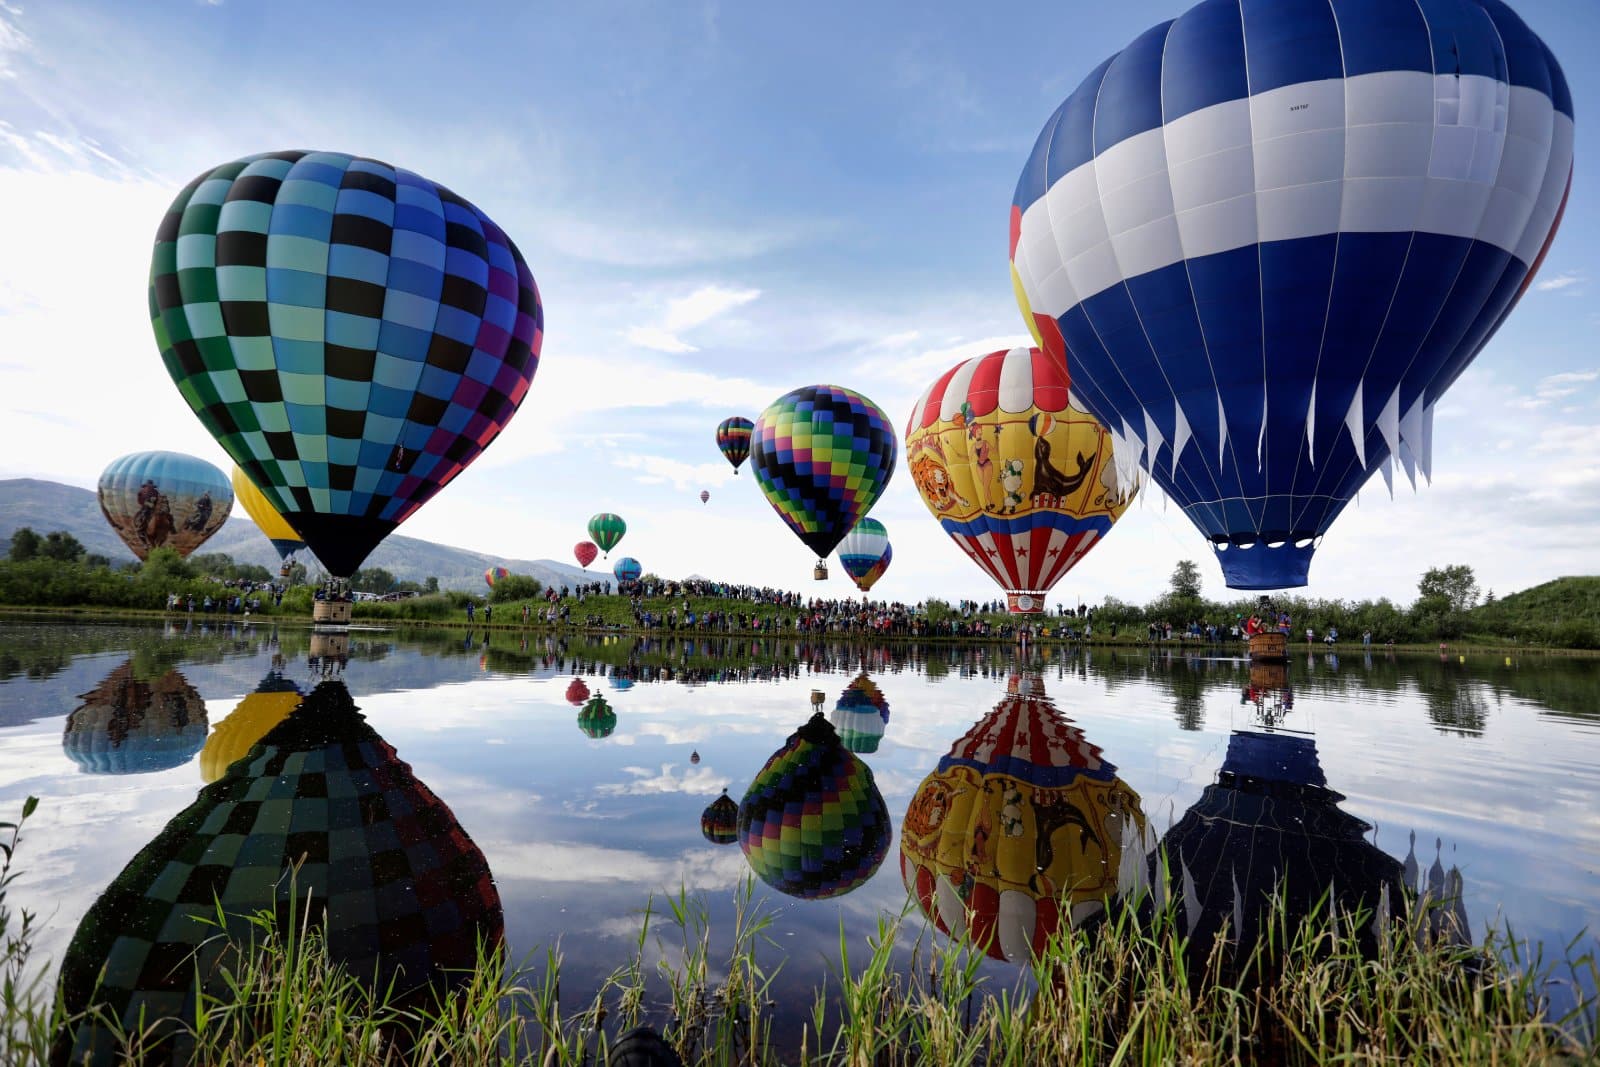 <p class="wp-caption-text">Image Credit: Shutterstock / Rhona Wise</p>  <p><span>Float above Steamboat Springs for breathtaking views of the Rockies. Morning flights capture the beauty of spring, starting around $250 per person.</span></p>